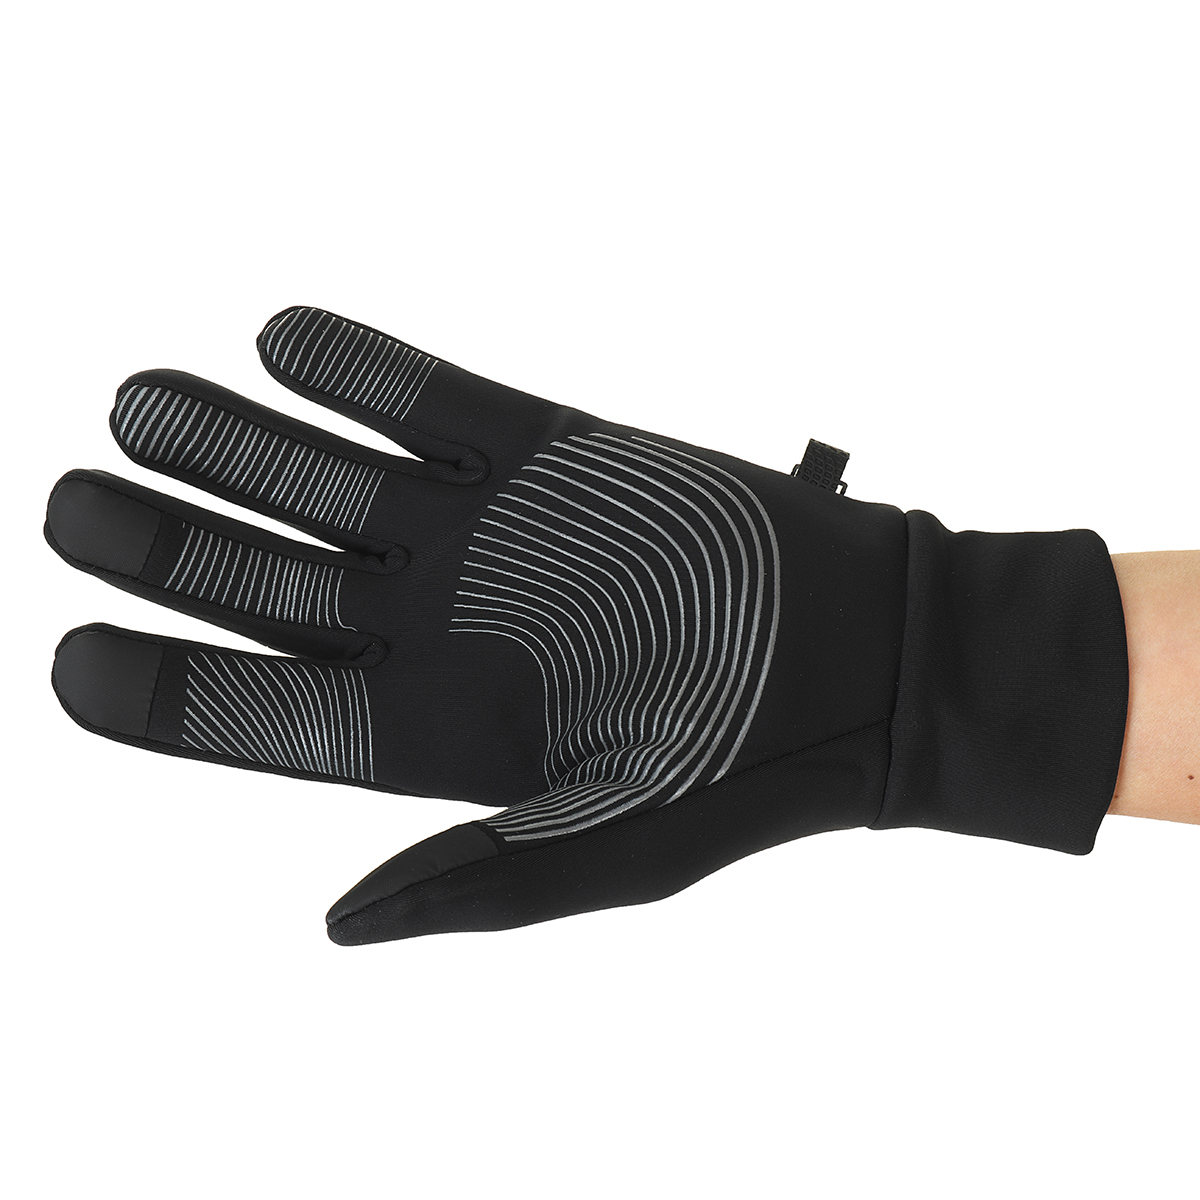 Winter-Warm-Touch-Screen-Thermal-Gloves-Ski-Snow-Snowboard-Cycling-Waterproof-Winter-Gloves-1921750-6